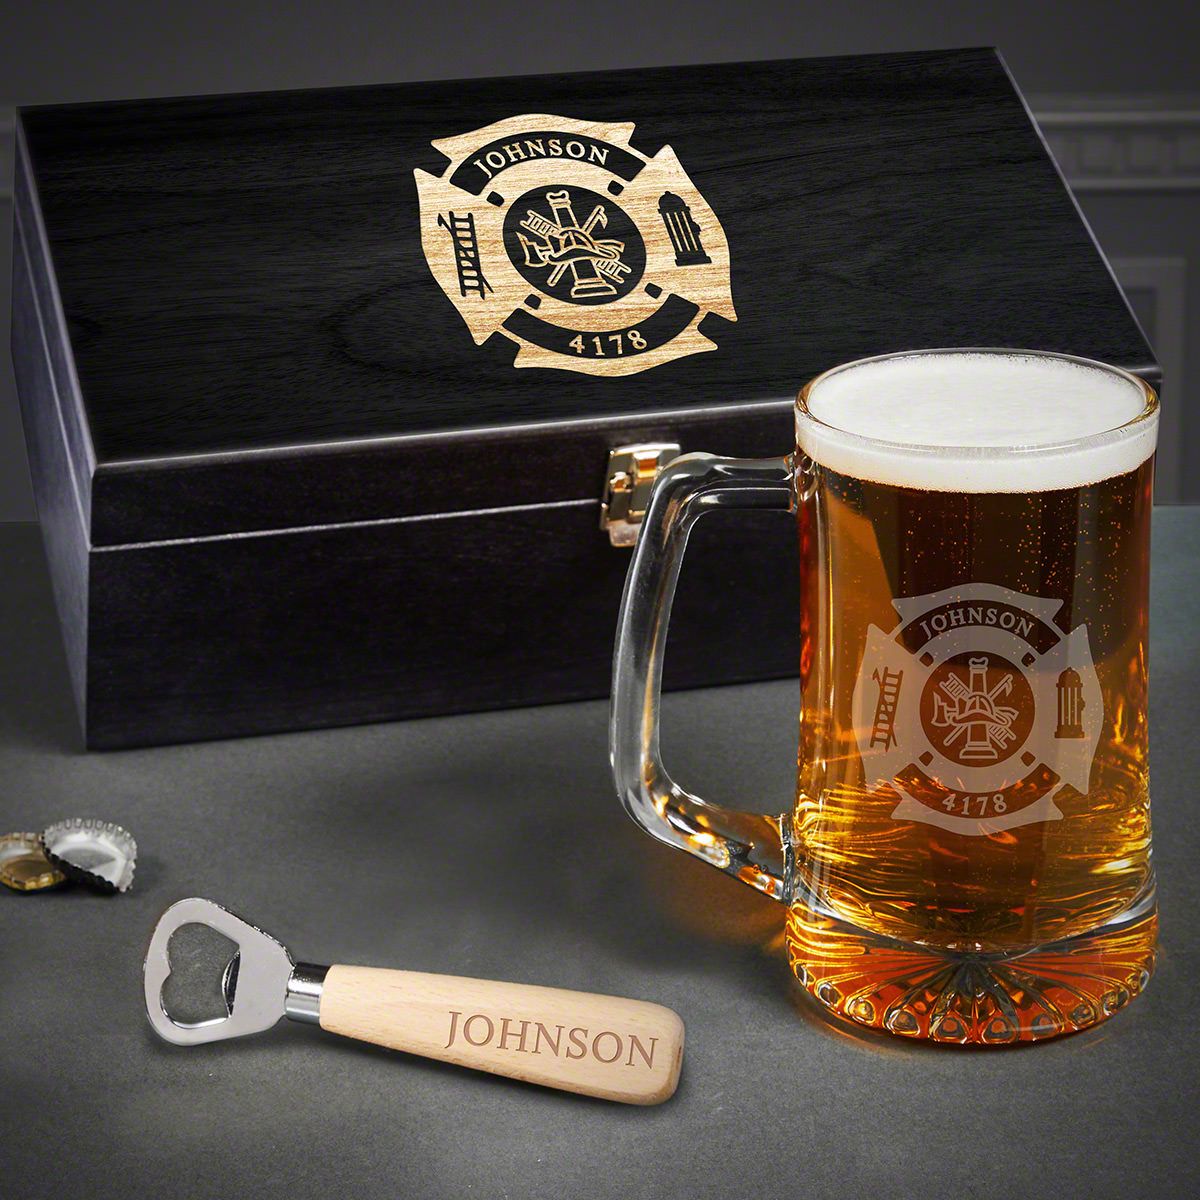 Fire & Rescue Engraved Beer Mug and Firefighter Gifts - Ebony Box